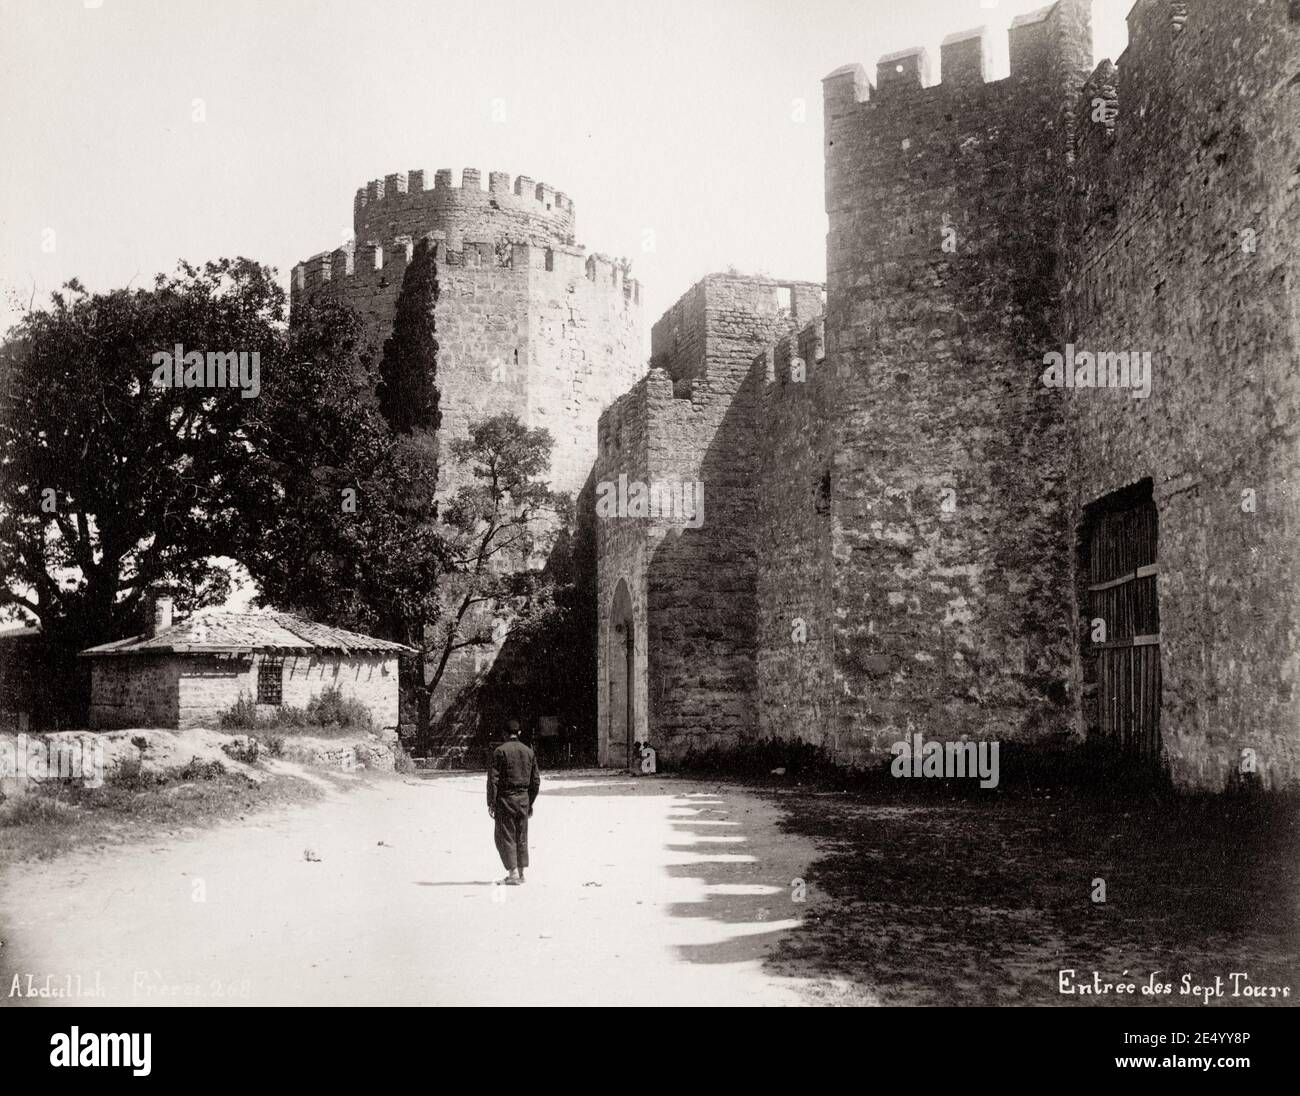 Vintage 19th century photograph: Yedikule Fortress (Turkish: Yedikule Hisarı or Yedikule Zindanları; meaning 'Fortress of the Seven Towers', or 'Dungeons of the Seven Towers', respectively) is a fortified historic structure located in the Yedikule neighbourhood of Fatih, in Istanbul, Turkey. Stock Photo